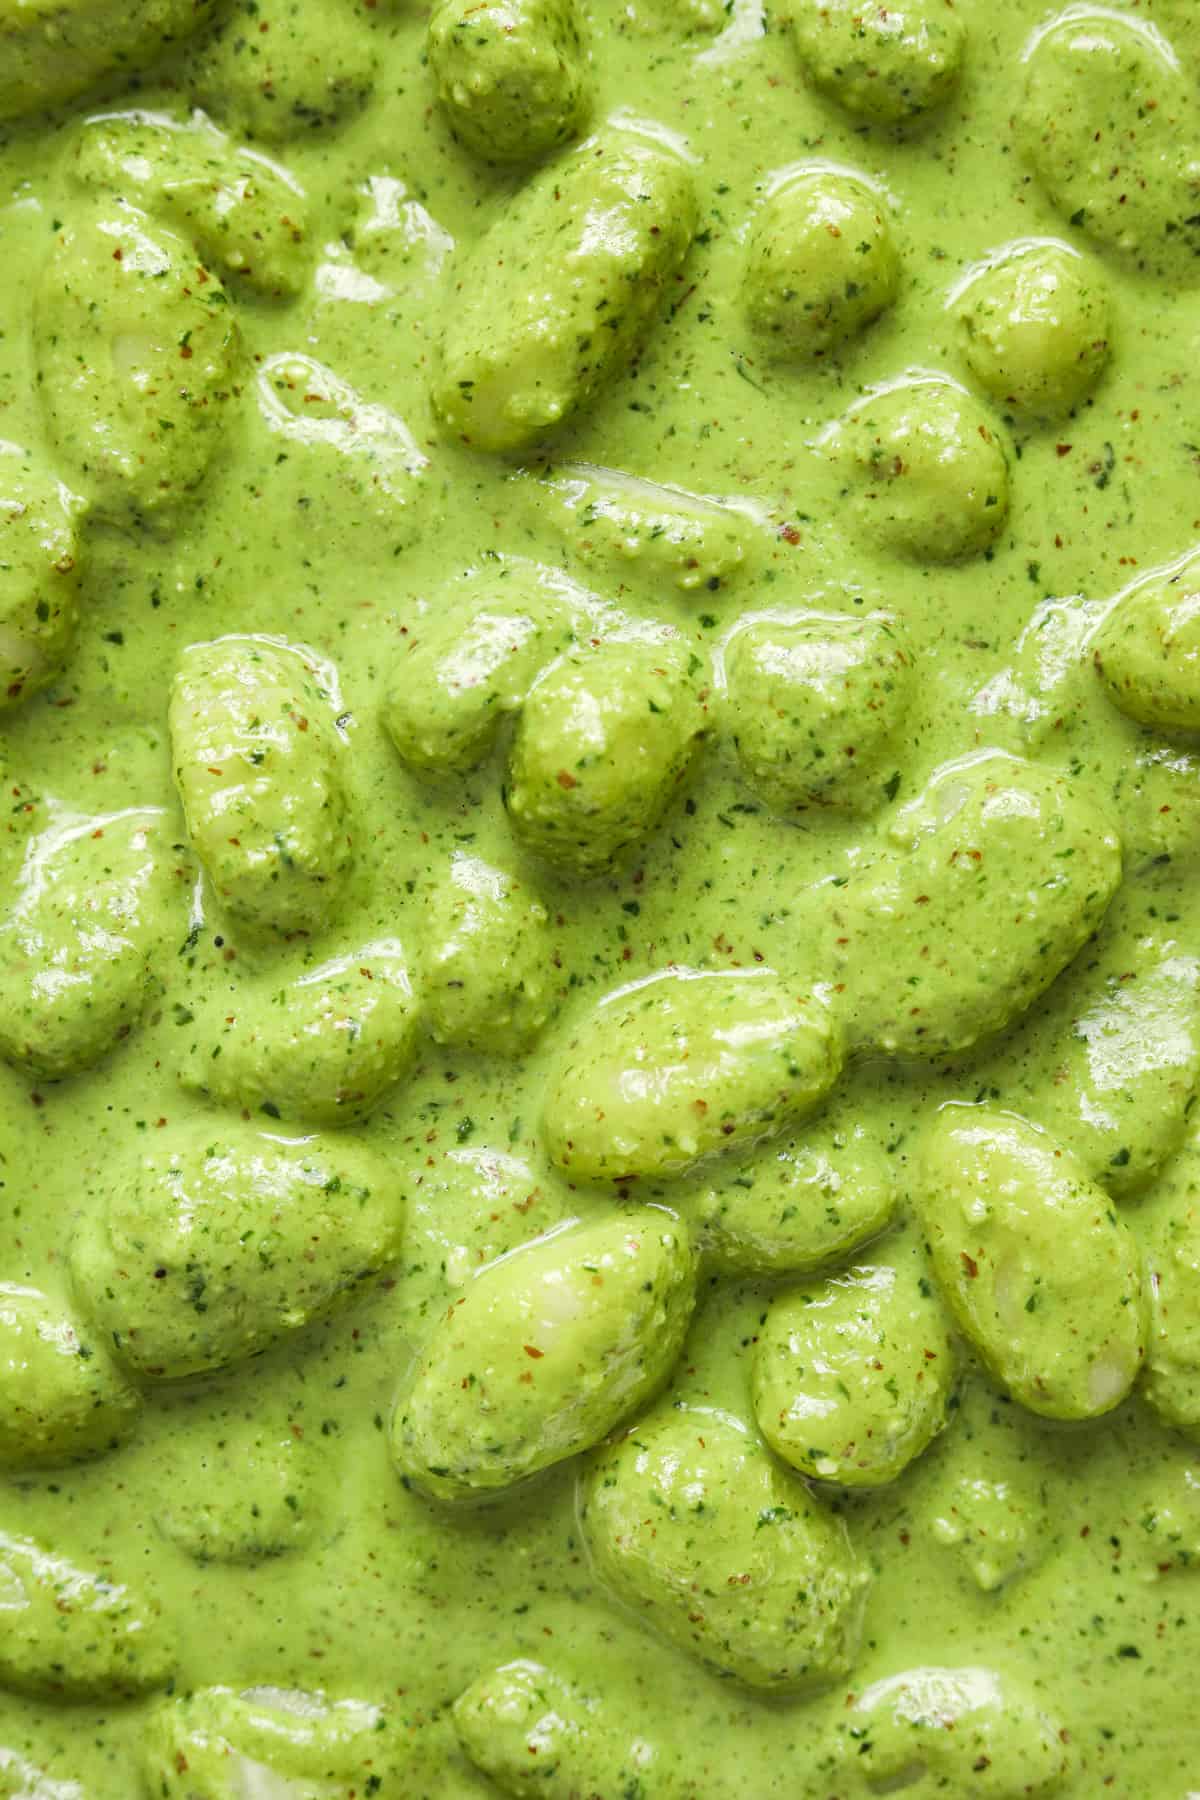 A close up image of gnocchi with vibrant green pesto sauce.